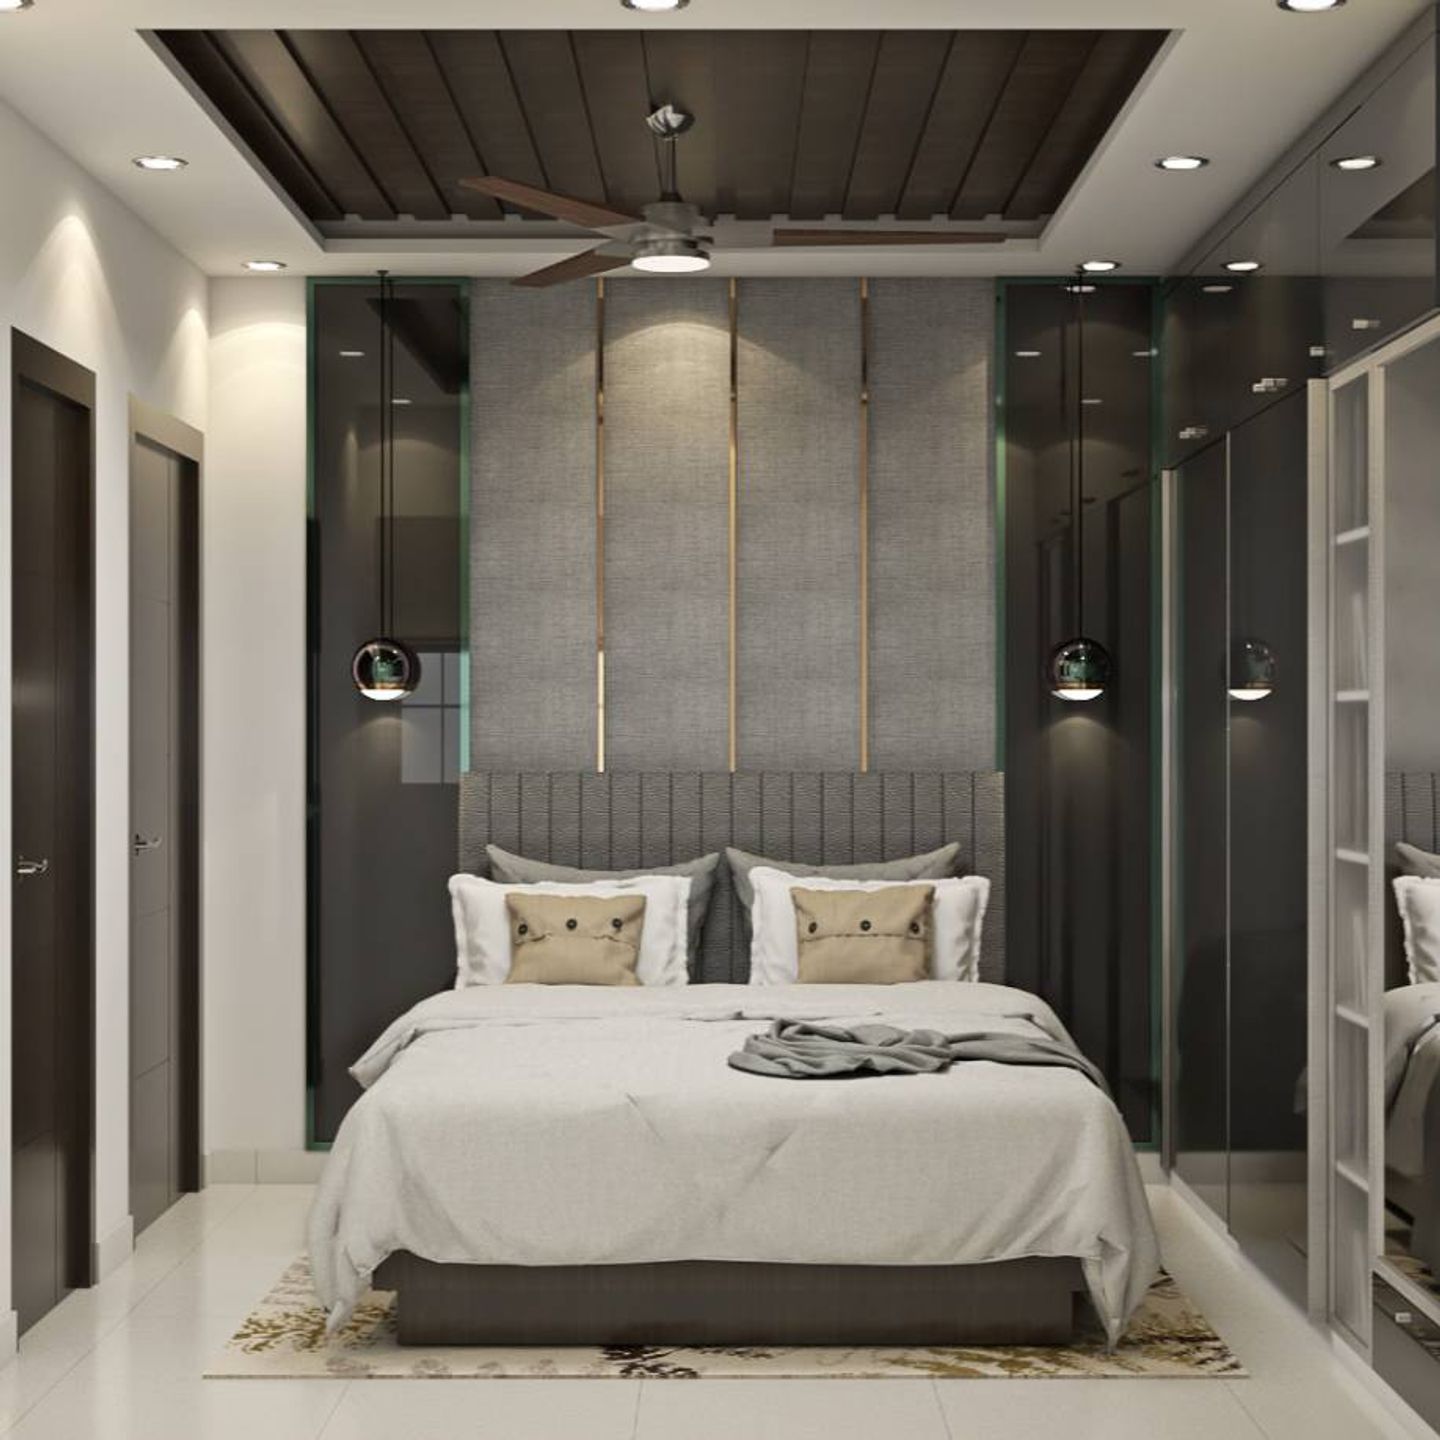 Modern Guest Room Design With A Grey King Size Bed